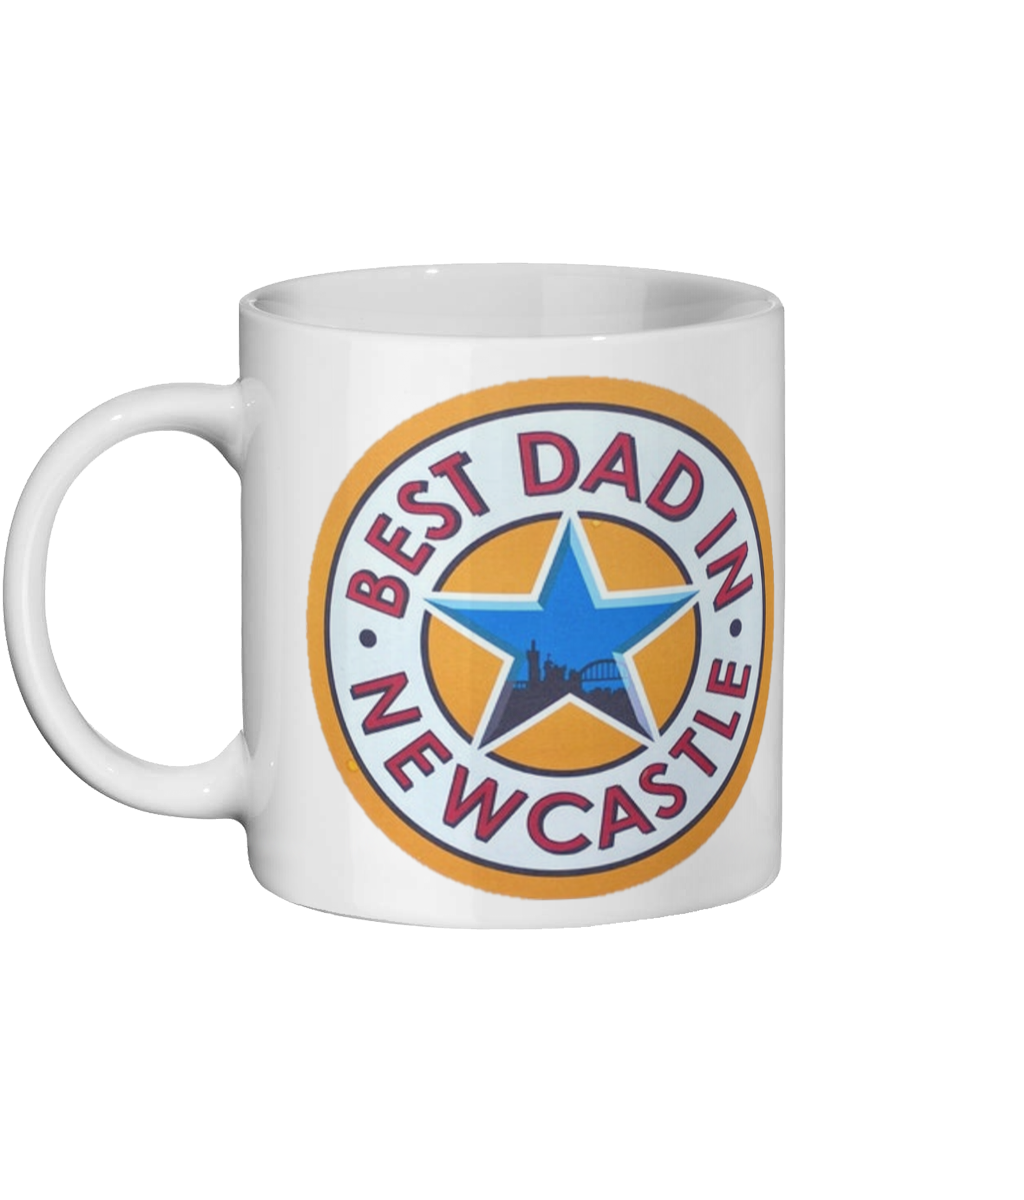 Newcastle United Mug - Best Dad in Newcastle, Newcastle United design for gifts - Mugs for him/her supporters